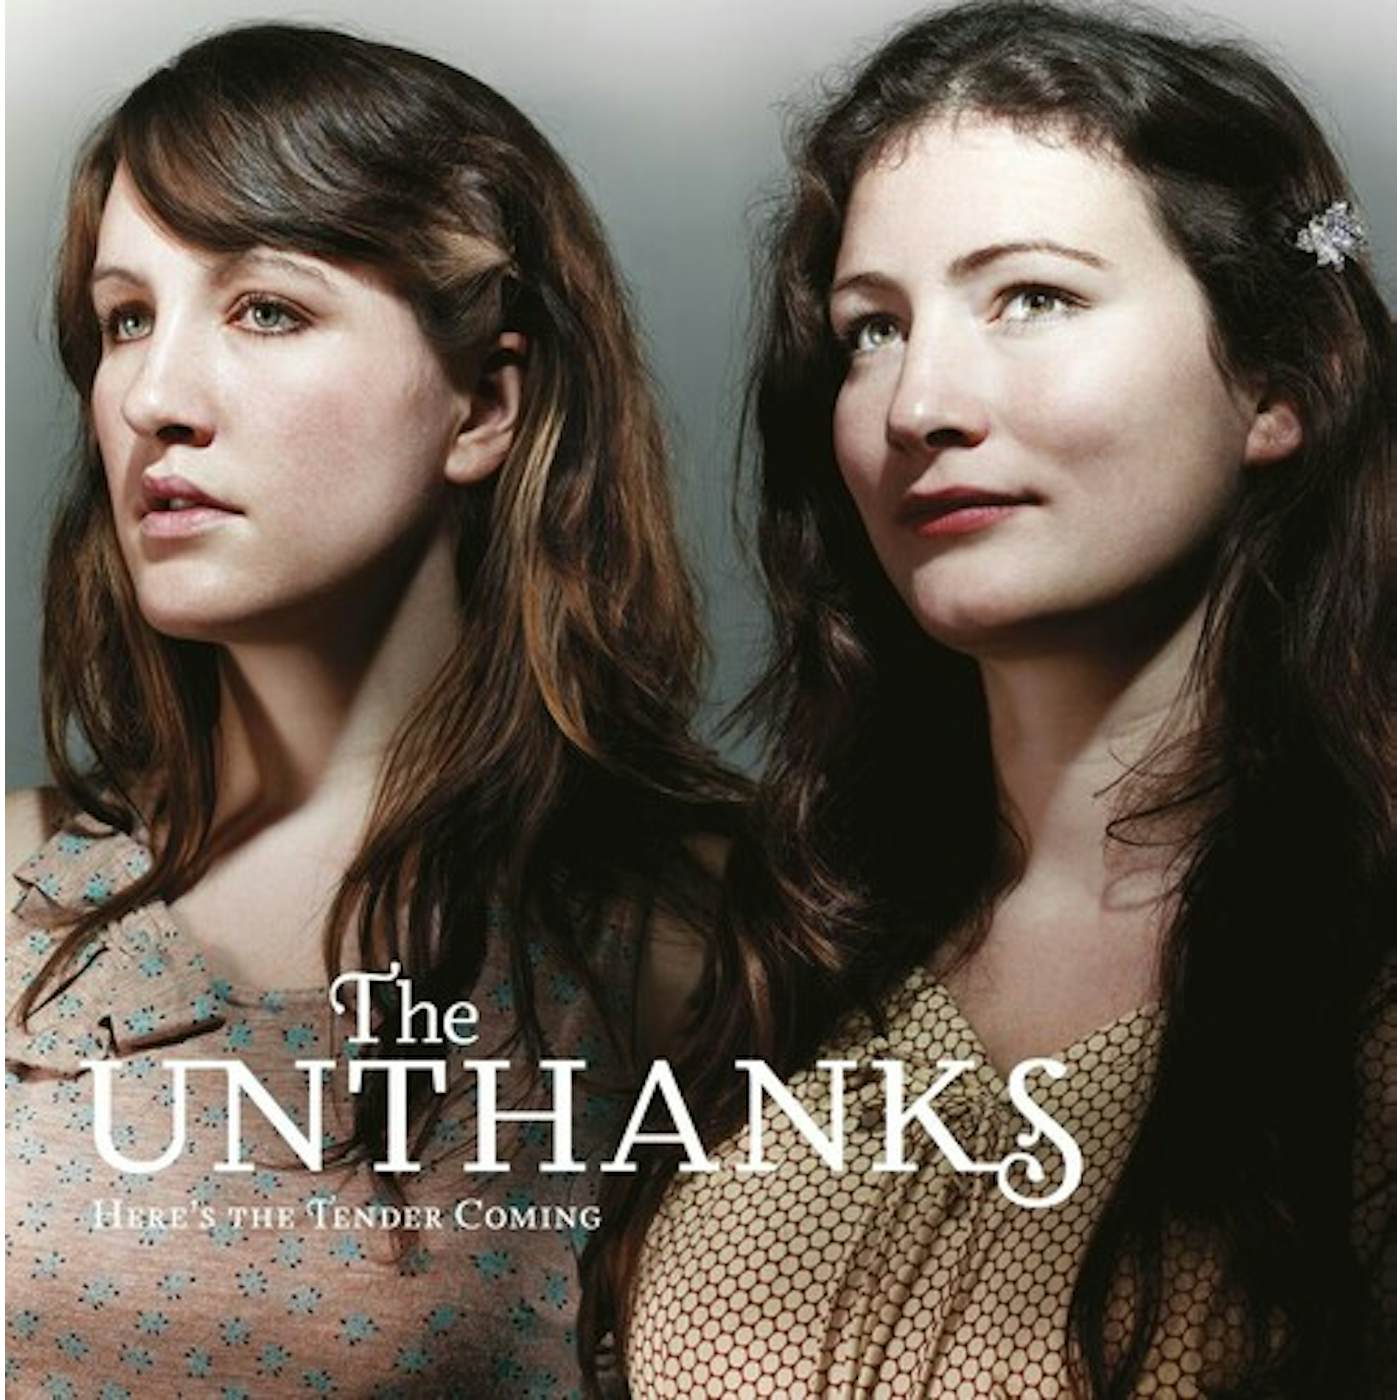 The Unthanks HERE'S THE TENDER COMING CD